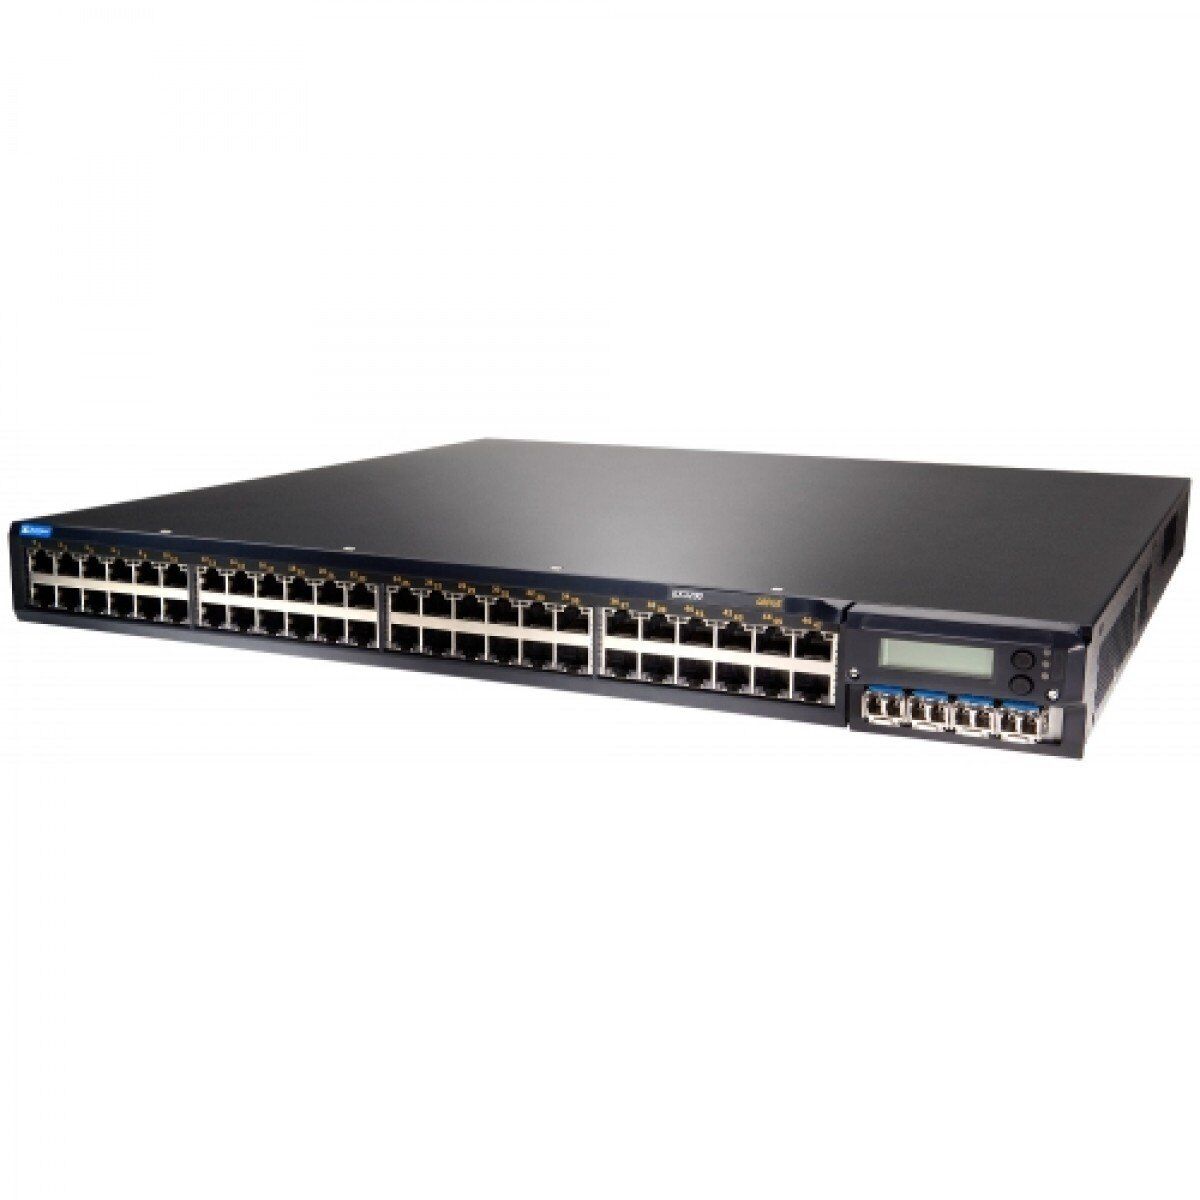 Juniper Networks EX4200-48P EX Series Switch ‎16 x 2 x 17 inches ‎25 pounds